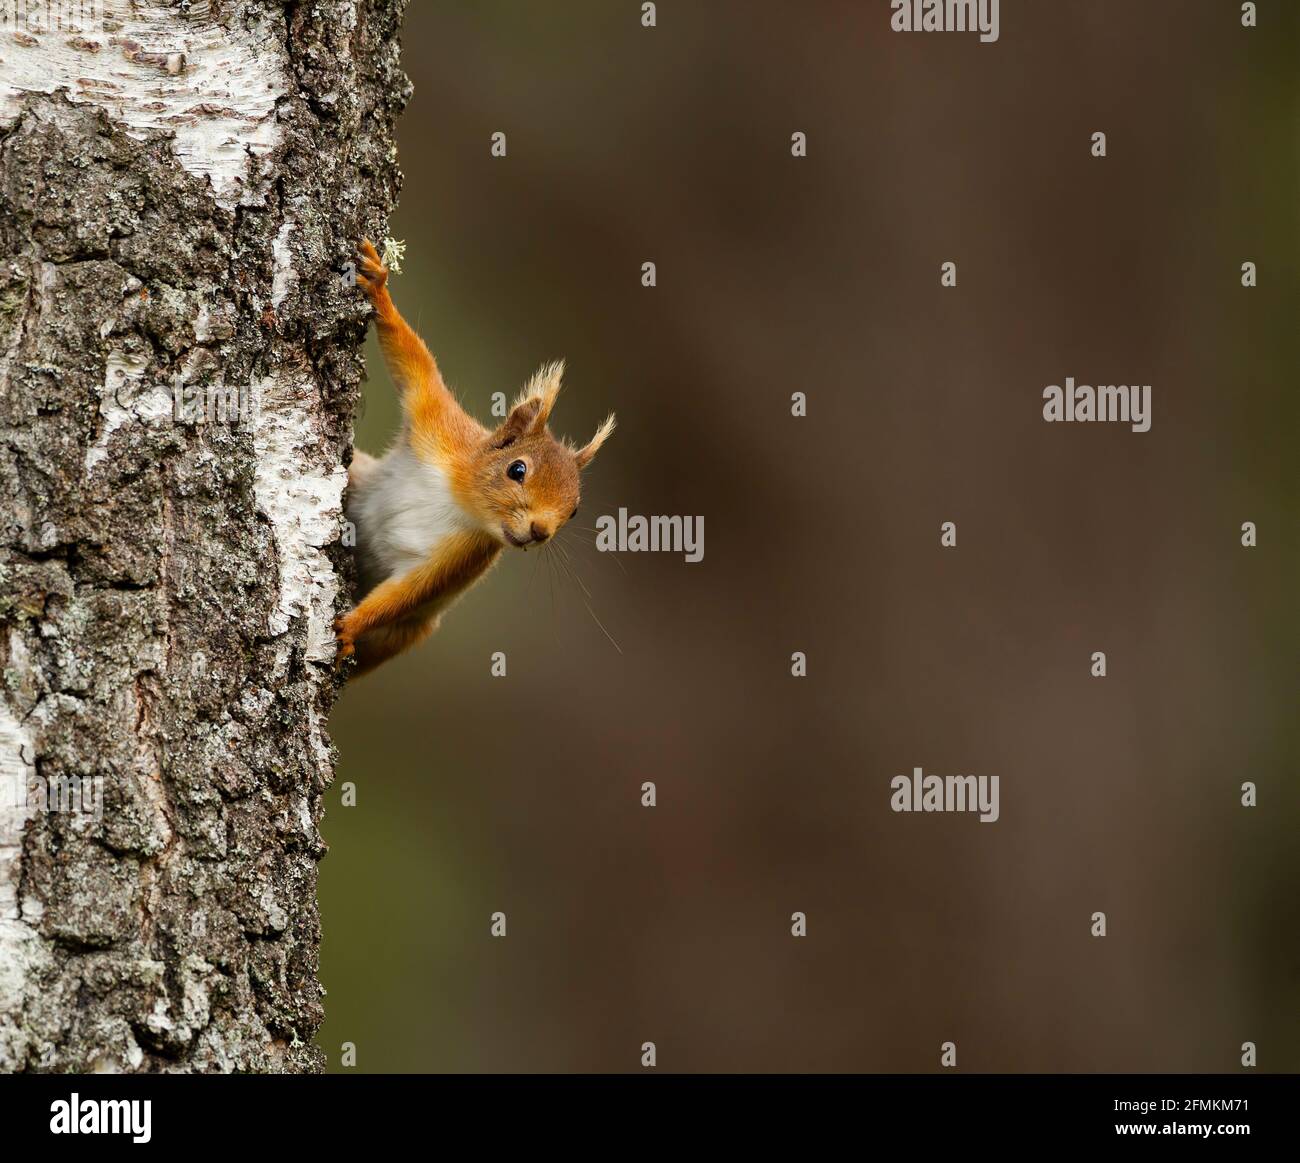 Red squirrel peering from behind a beech tree, in a forest Stock Photo